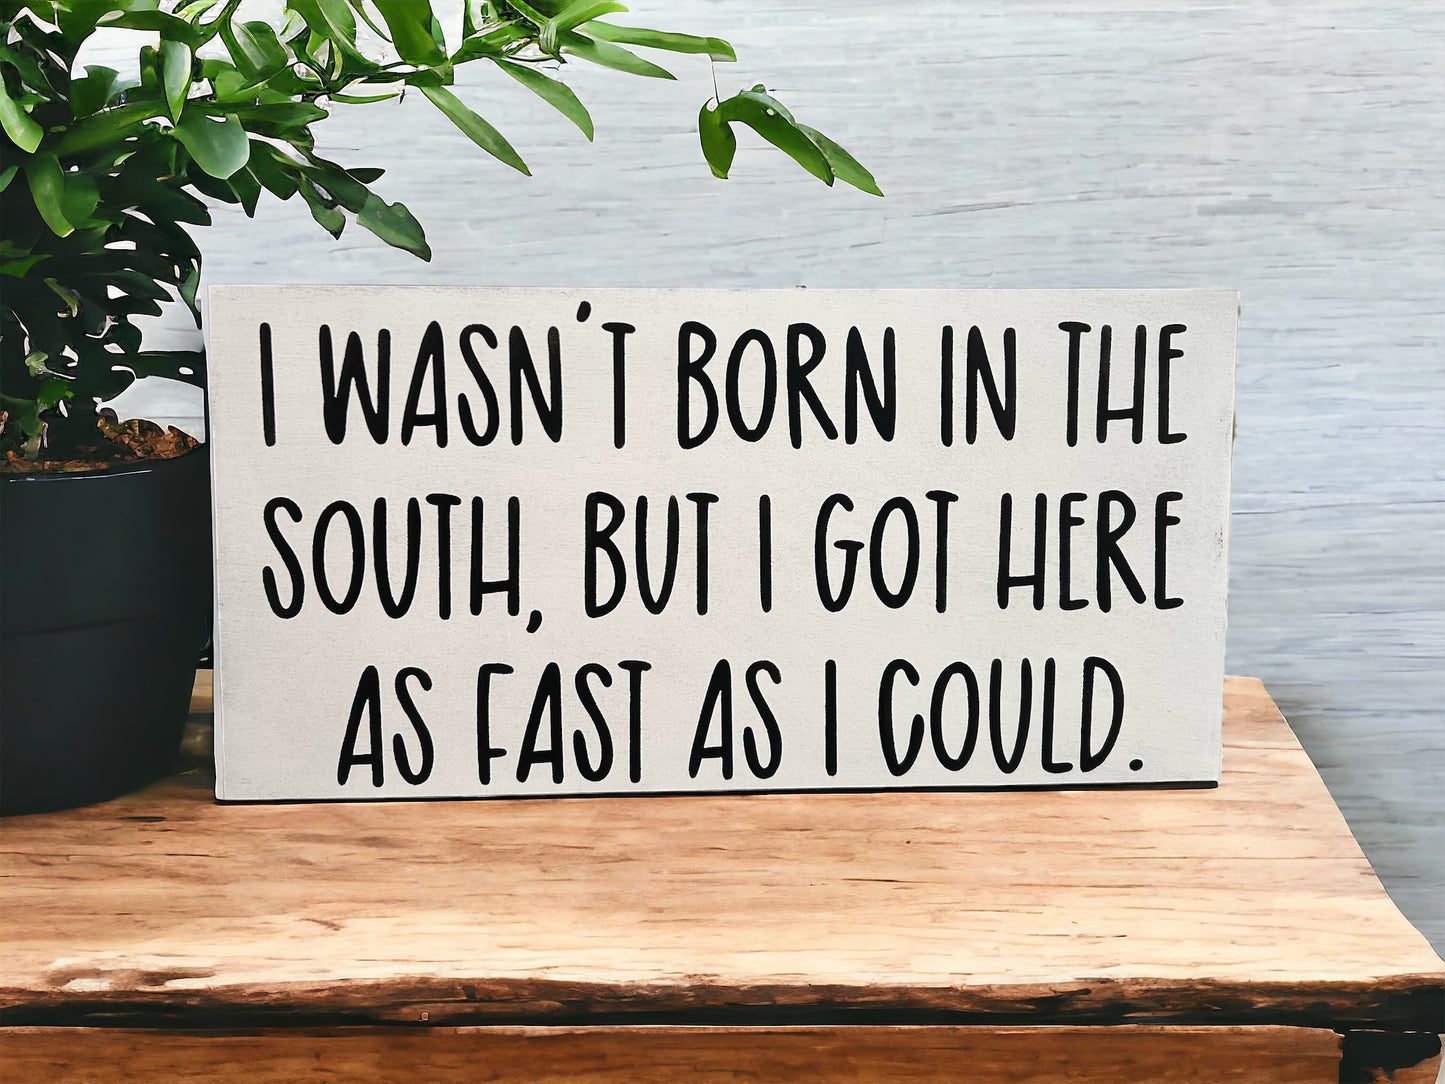 Wasn't Born In The South - Funny Rustic Wood White Sign